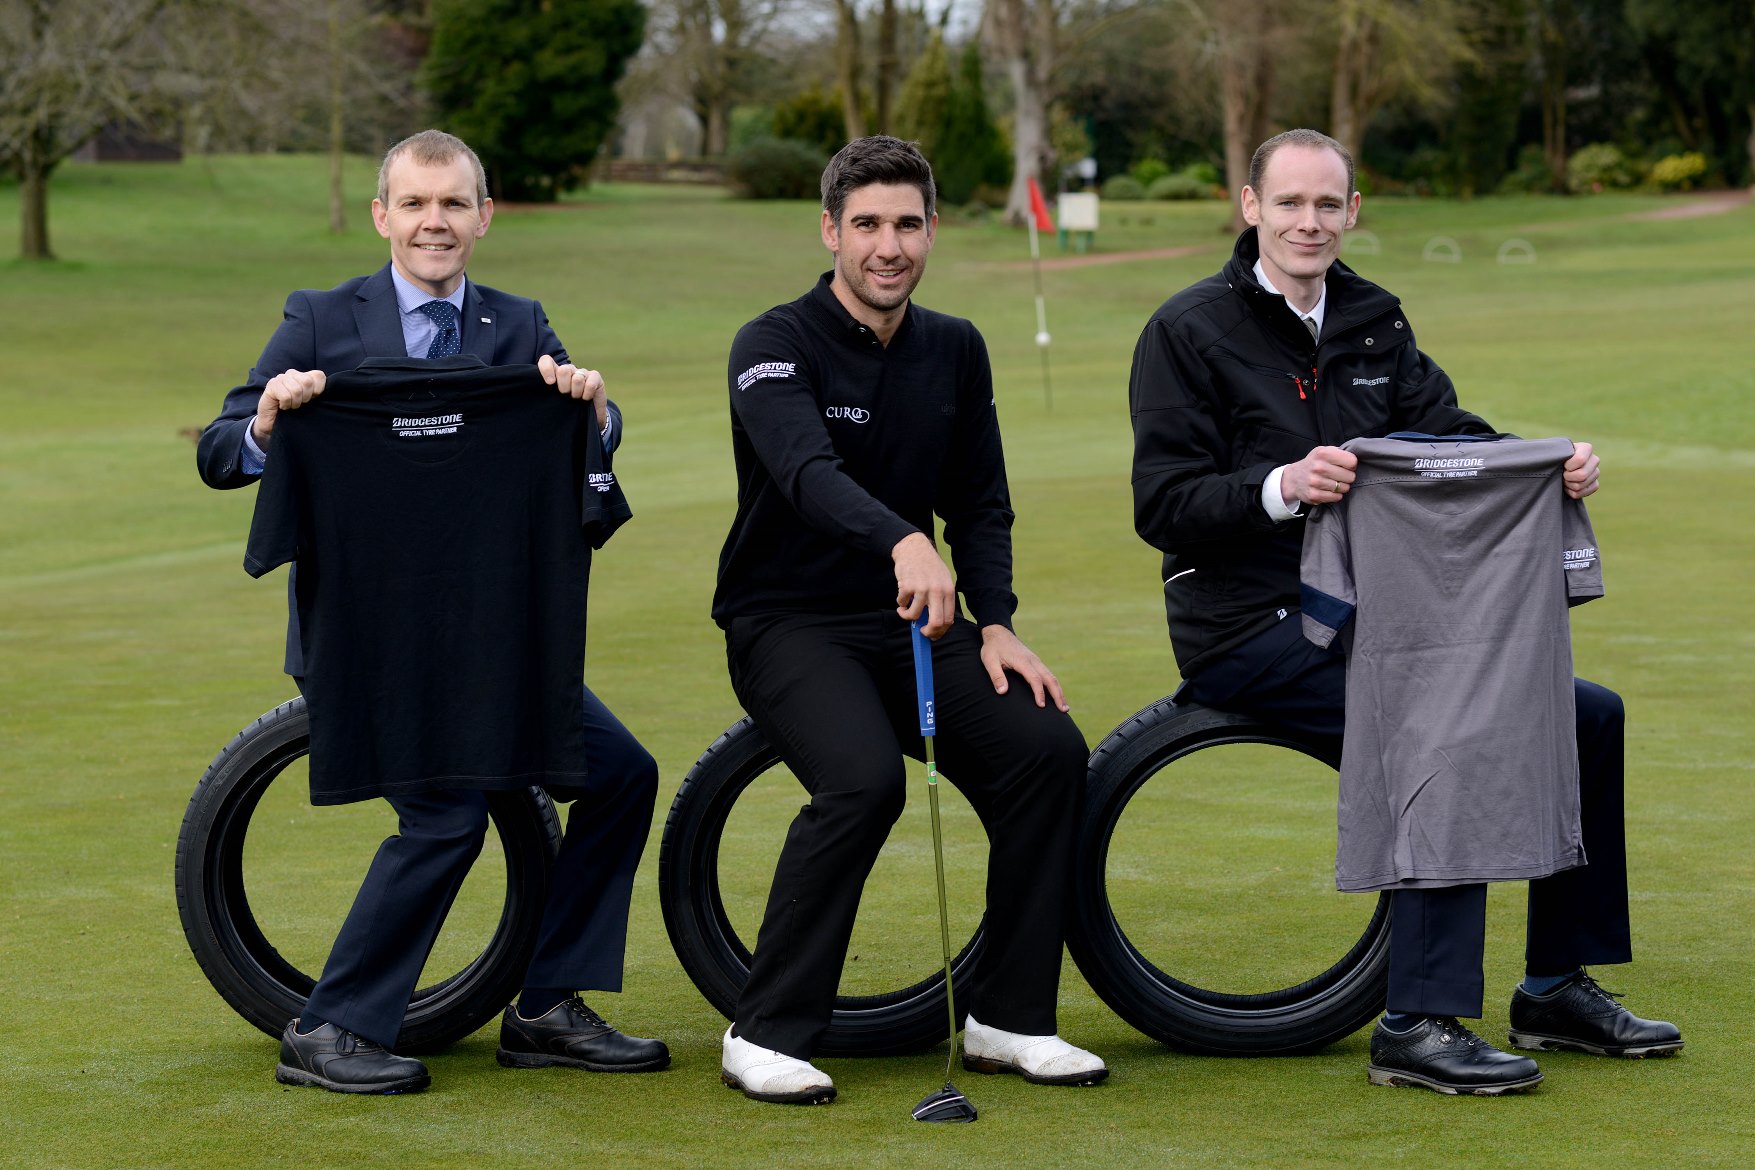 Bridgestone to support young Worcester golfer’s rise on European Tour